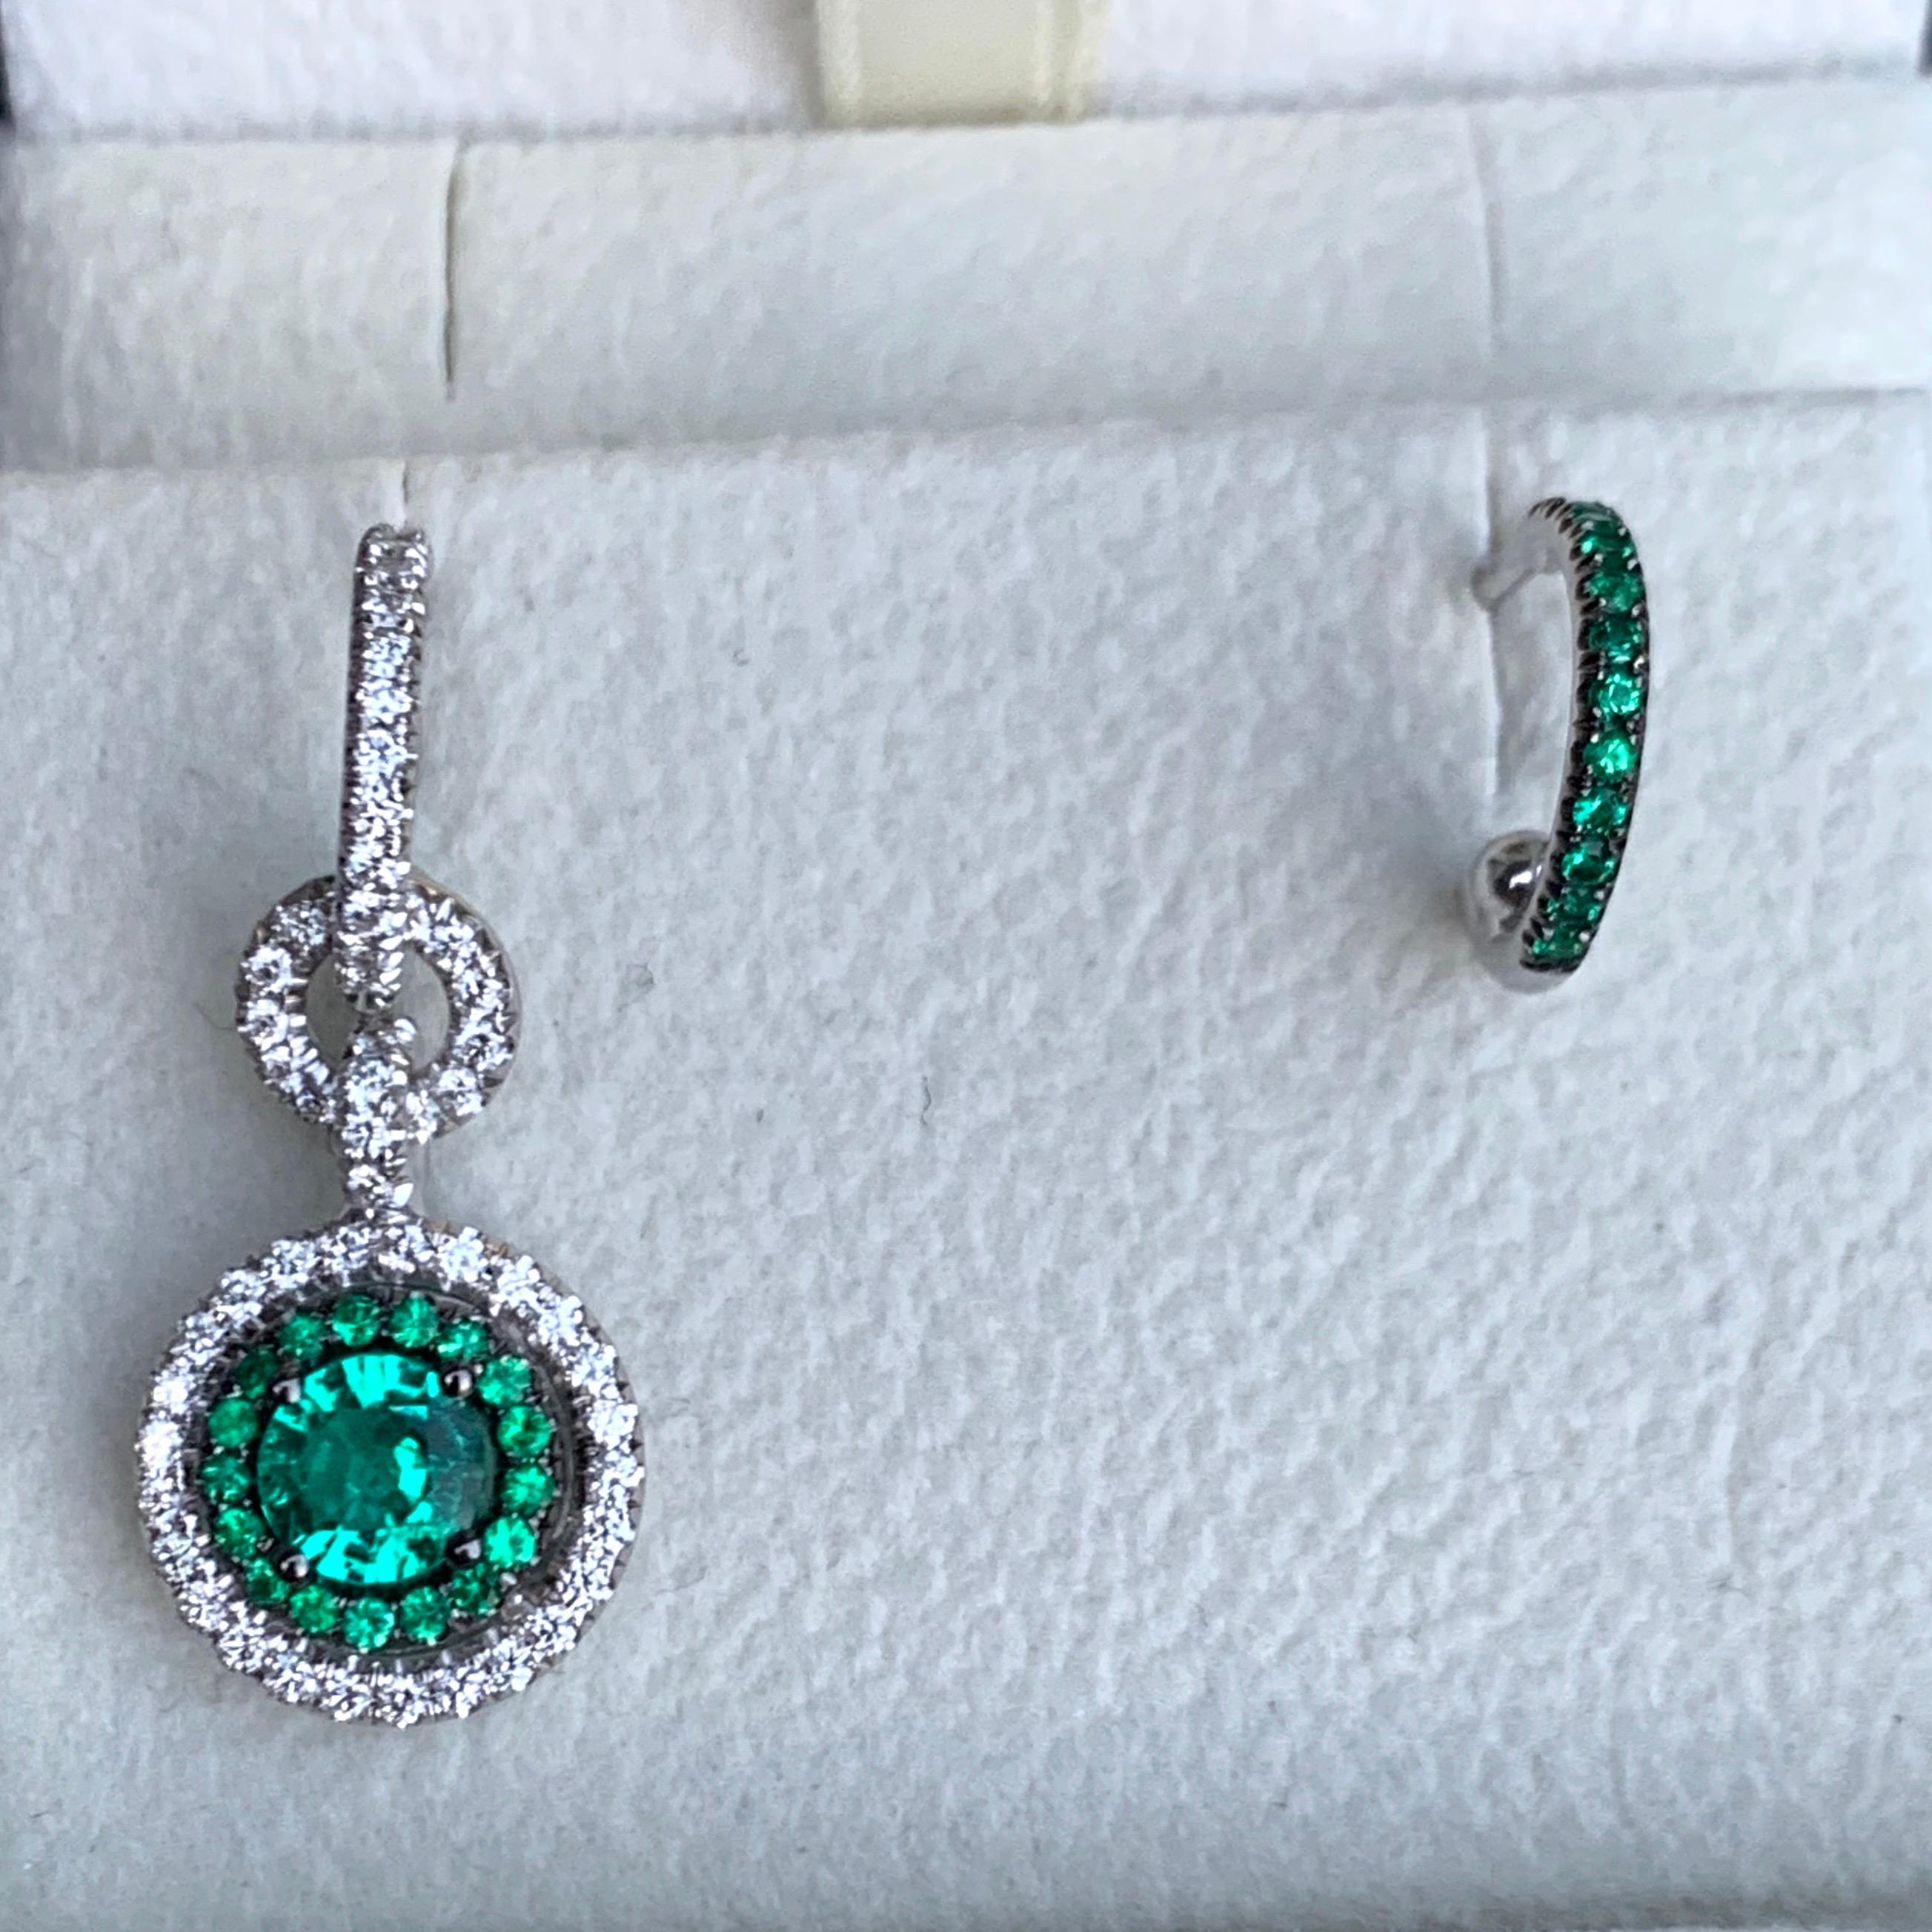 Contemporary Mismatched Colombian Emerald and Diamond Earrings & Enhancer Bail